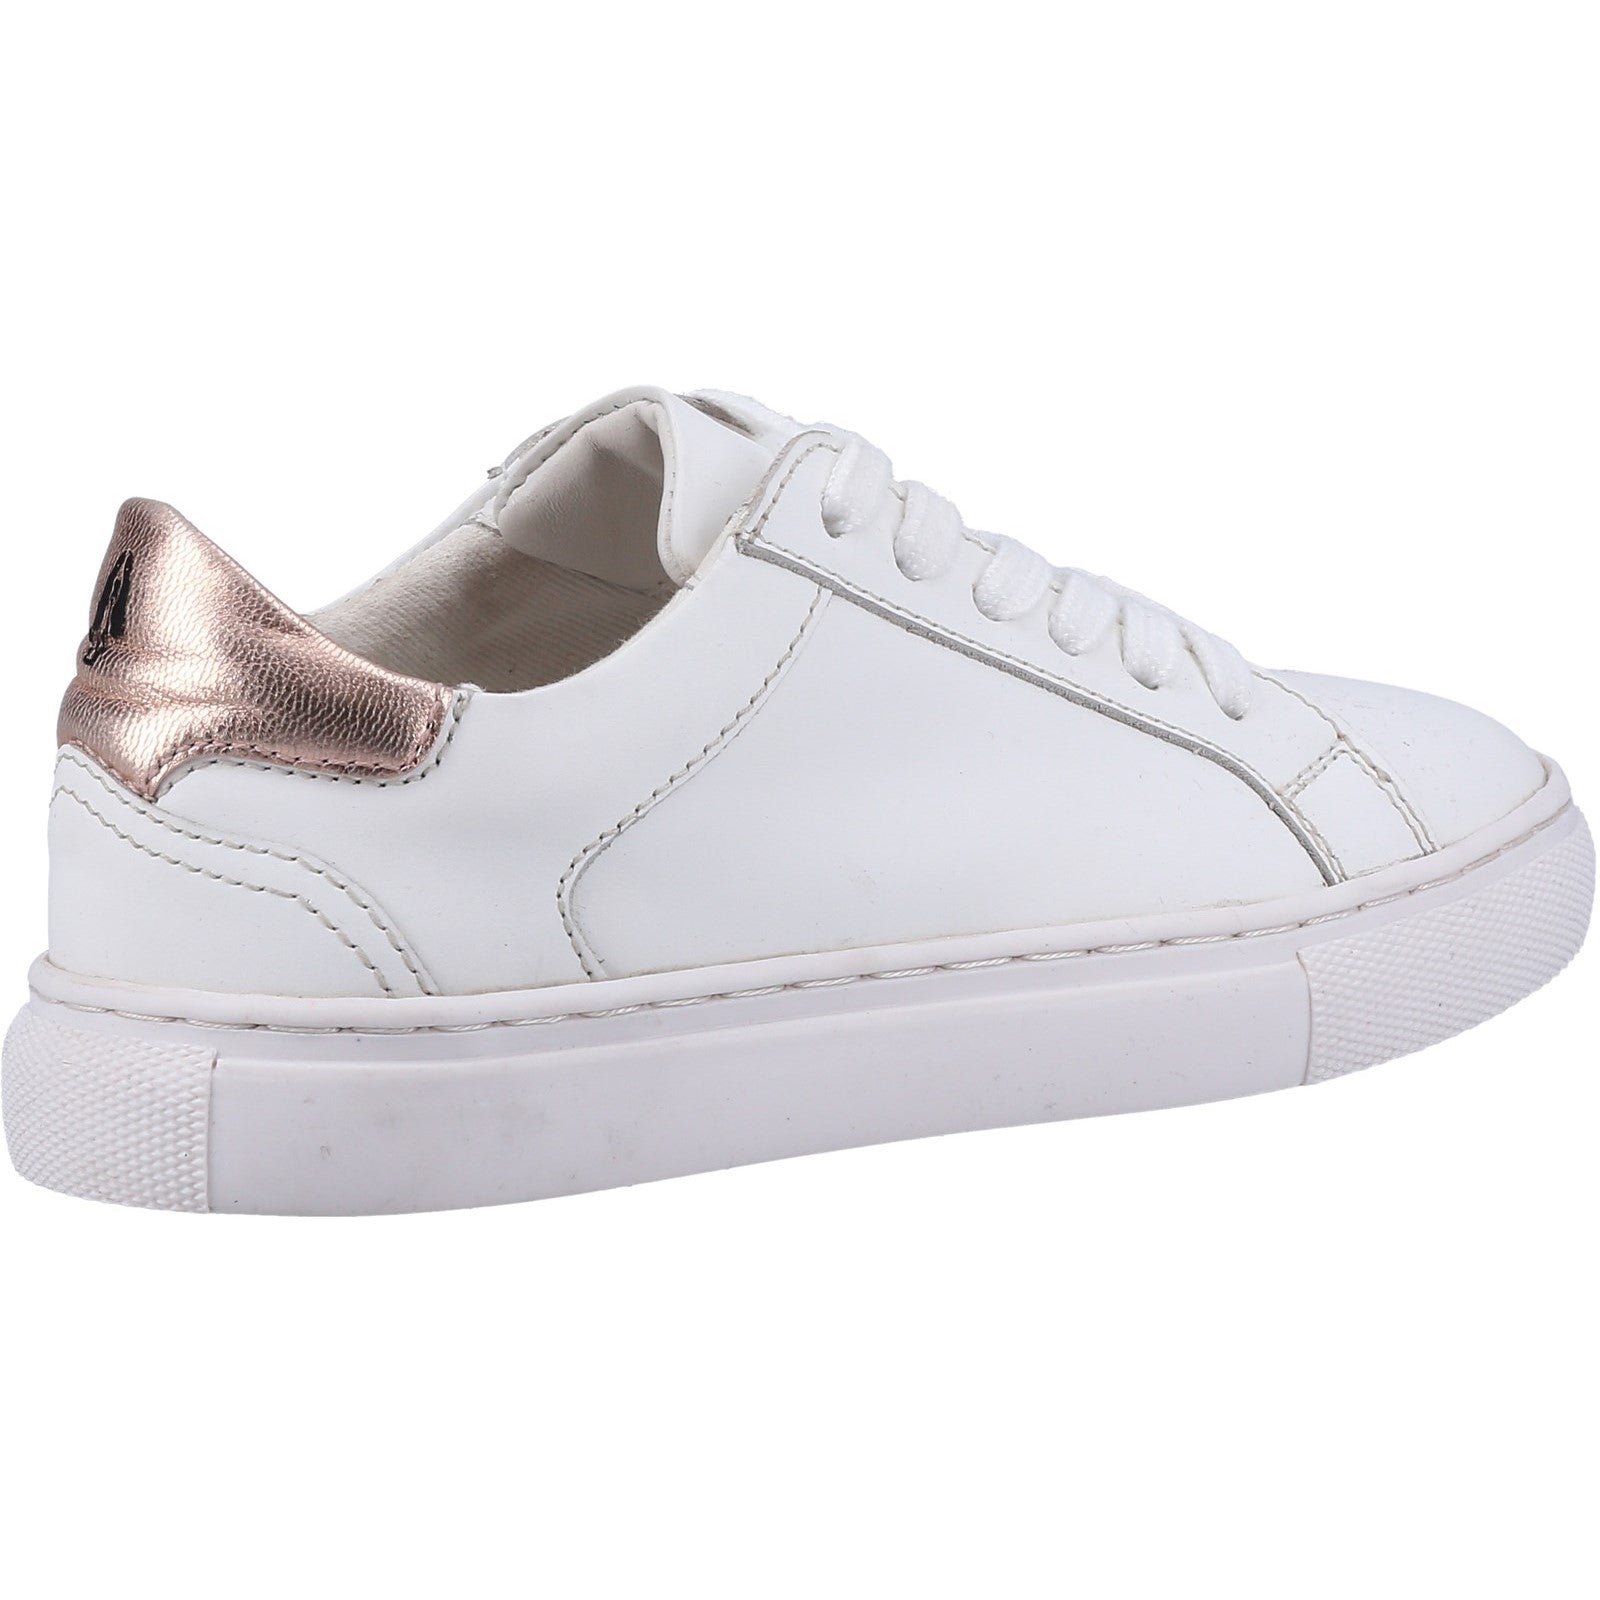 Hush Puppies Girls Camille Leather Trainers - White